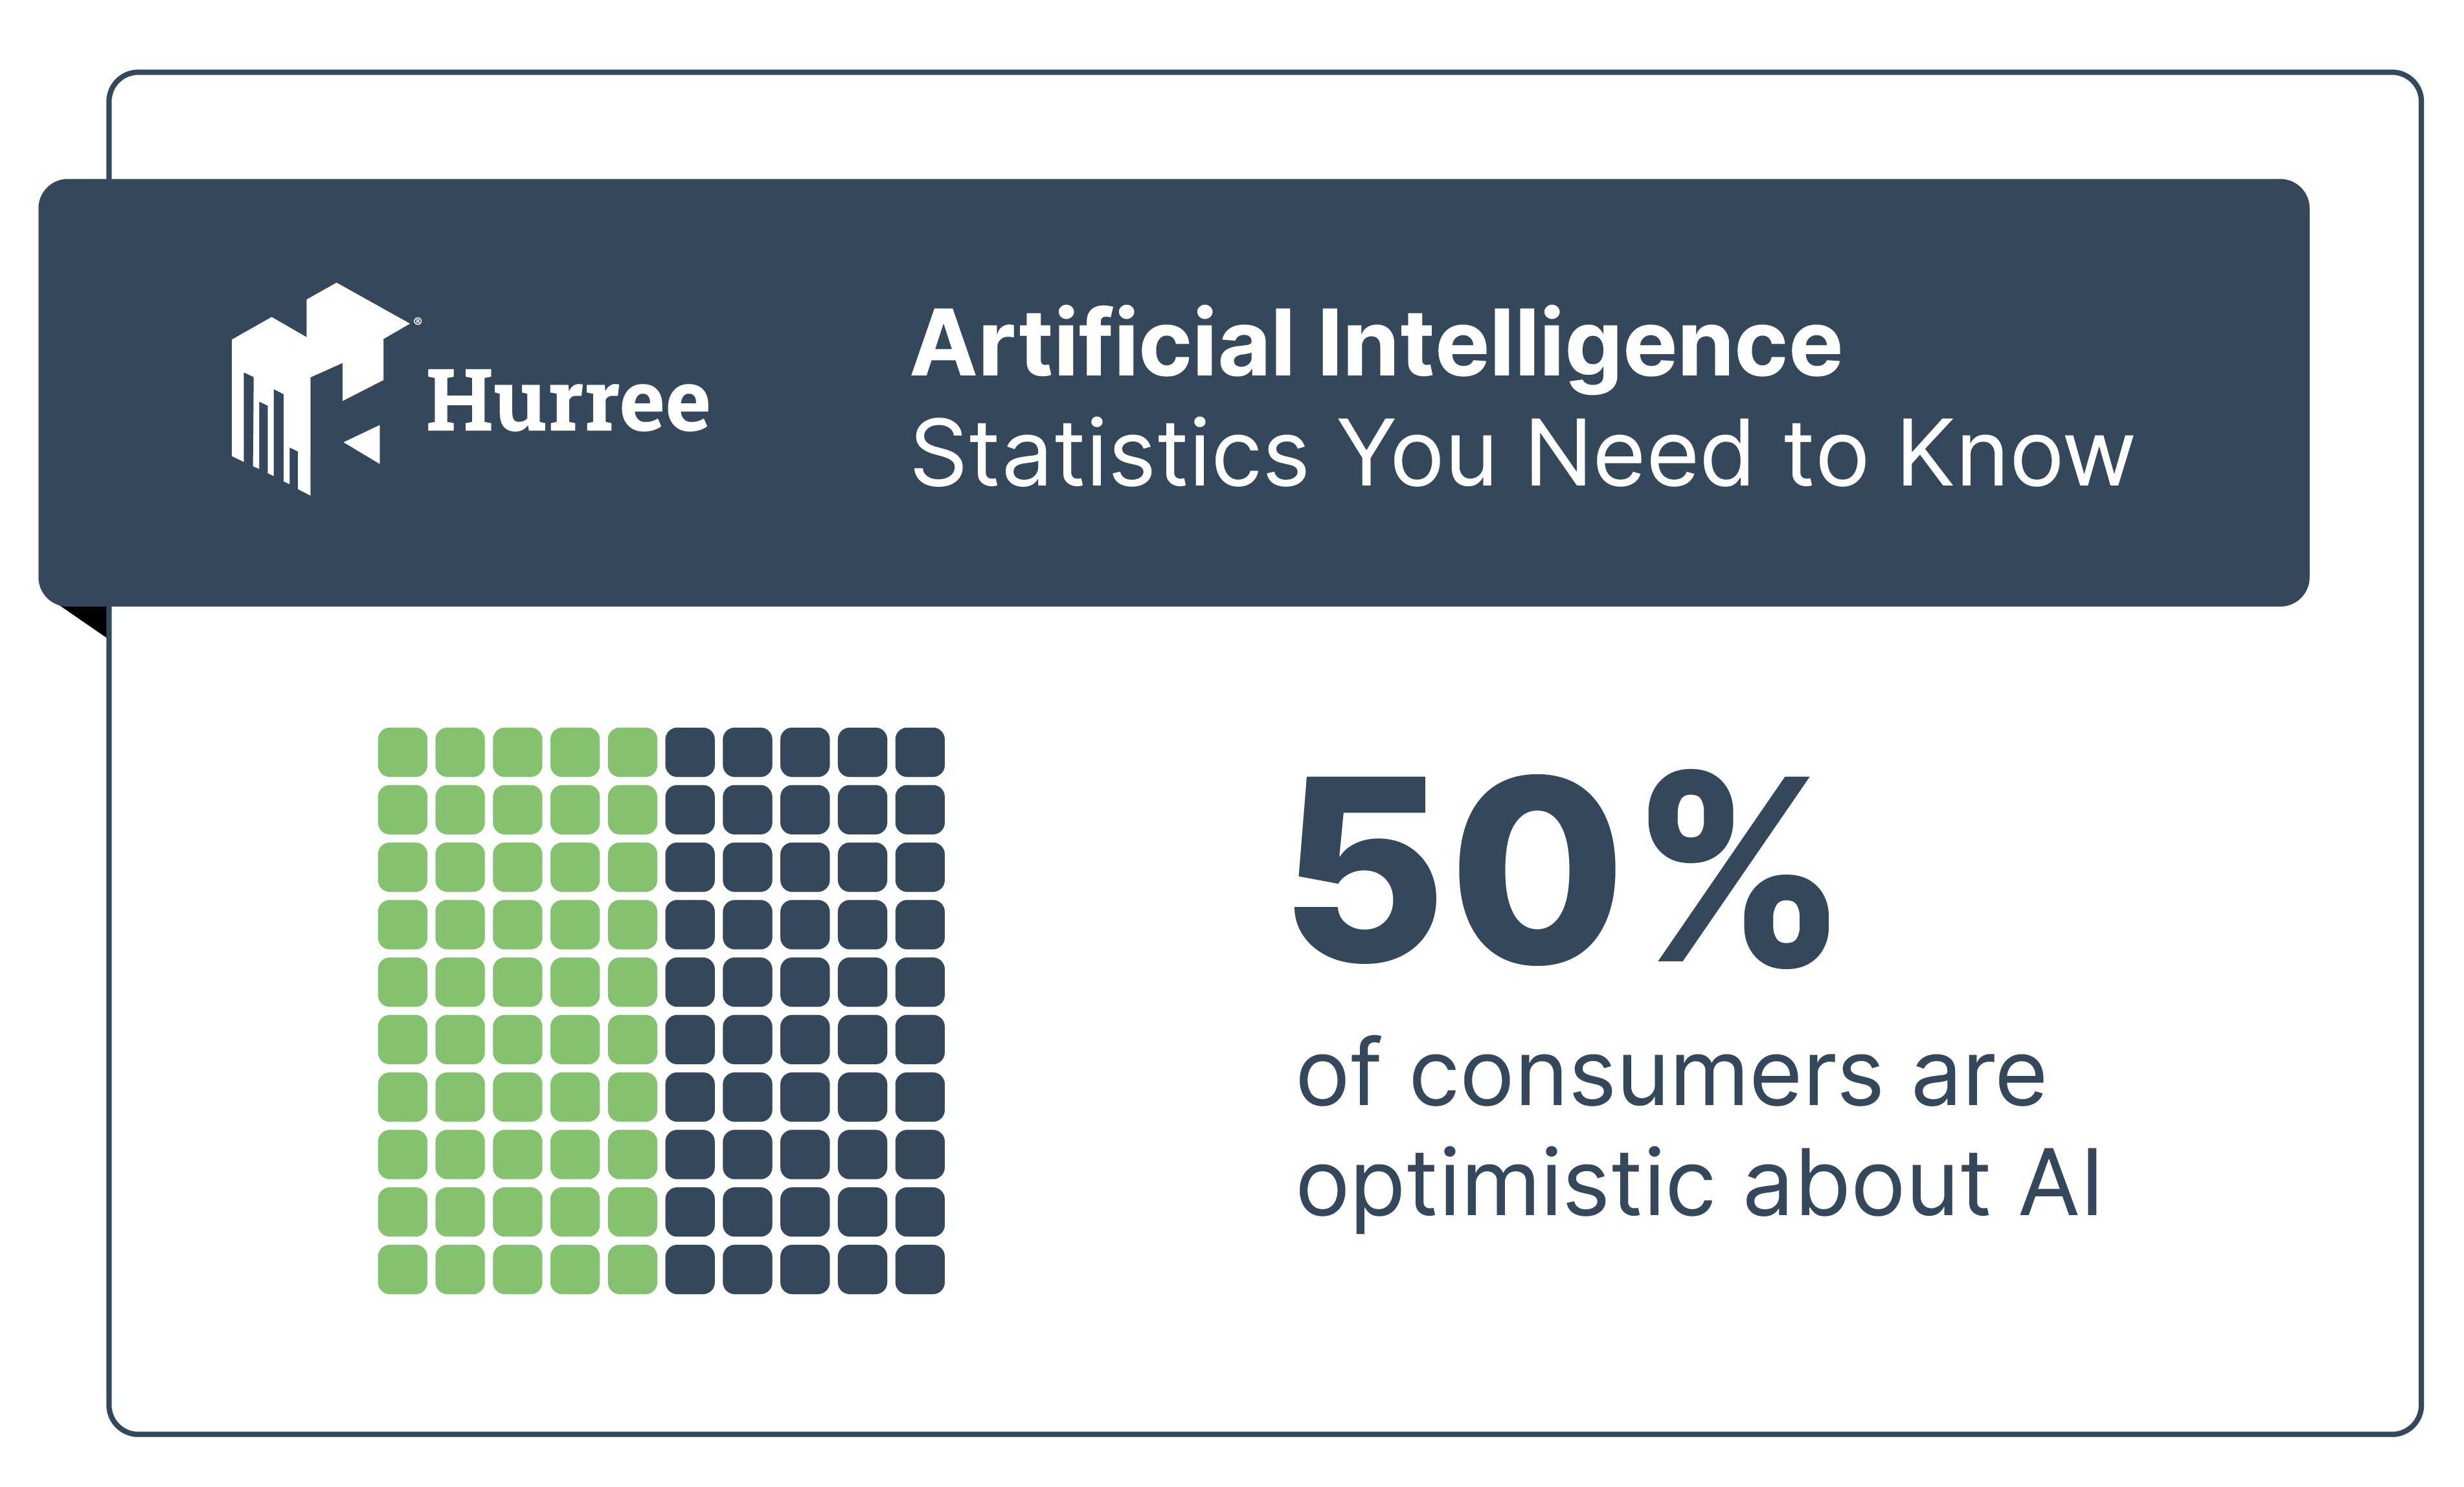 50% of consumers are optimistic about AI